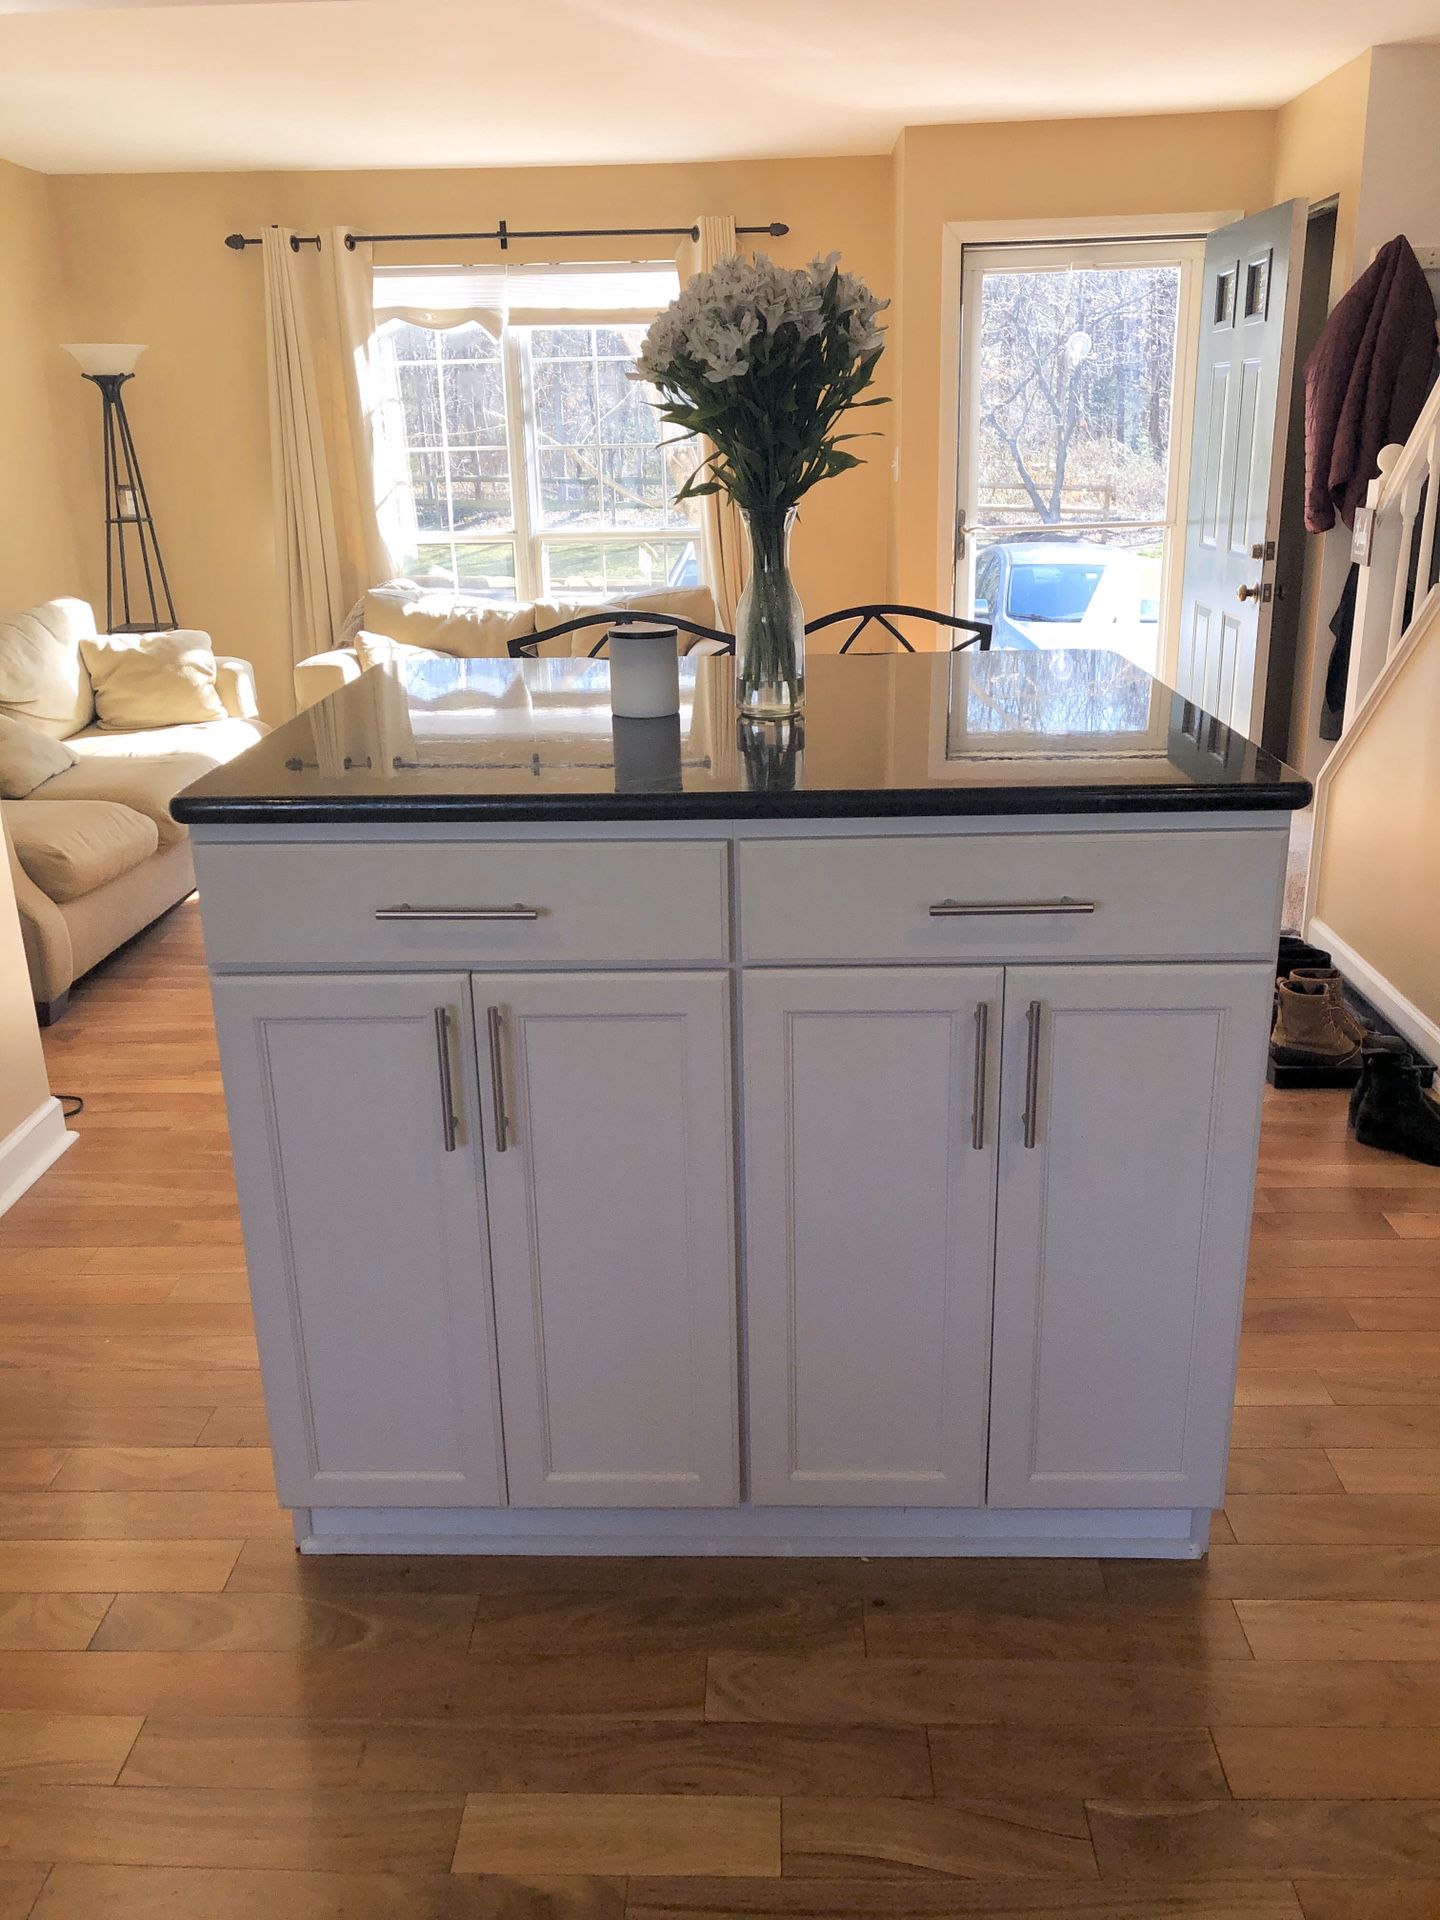 Large White Kitchen Island with Bar and Cabinets